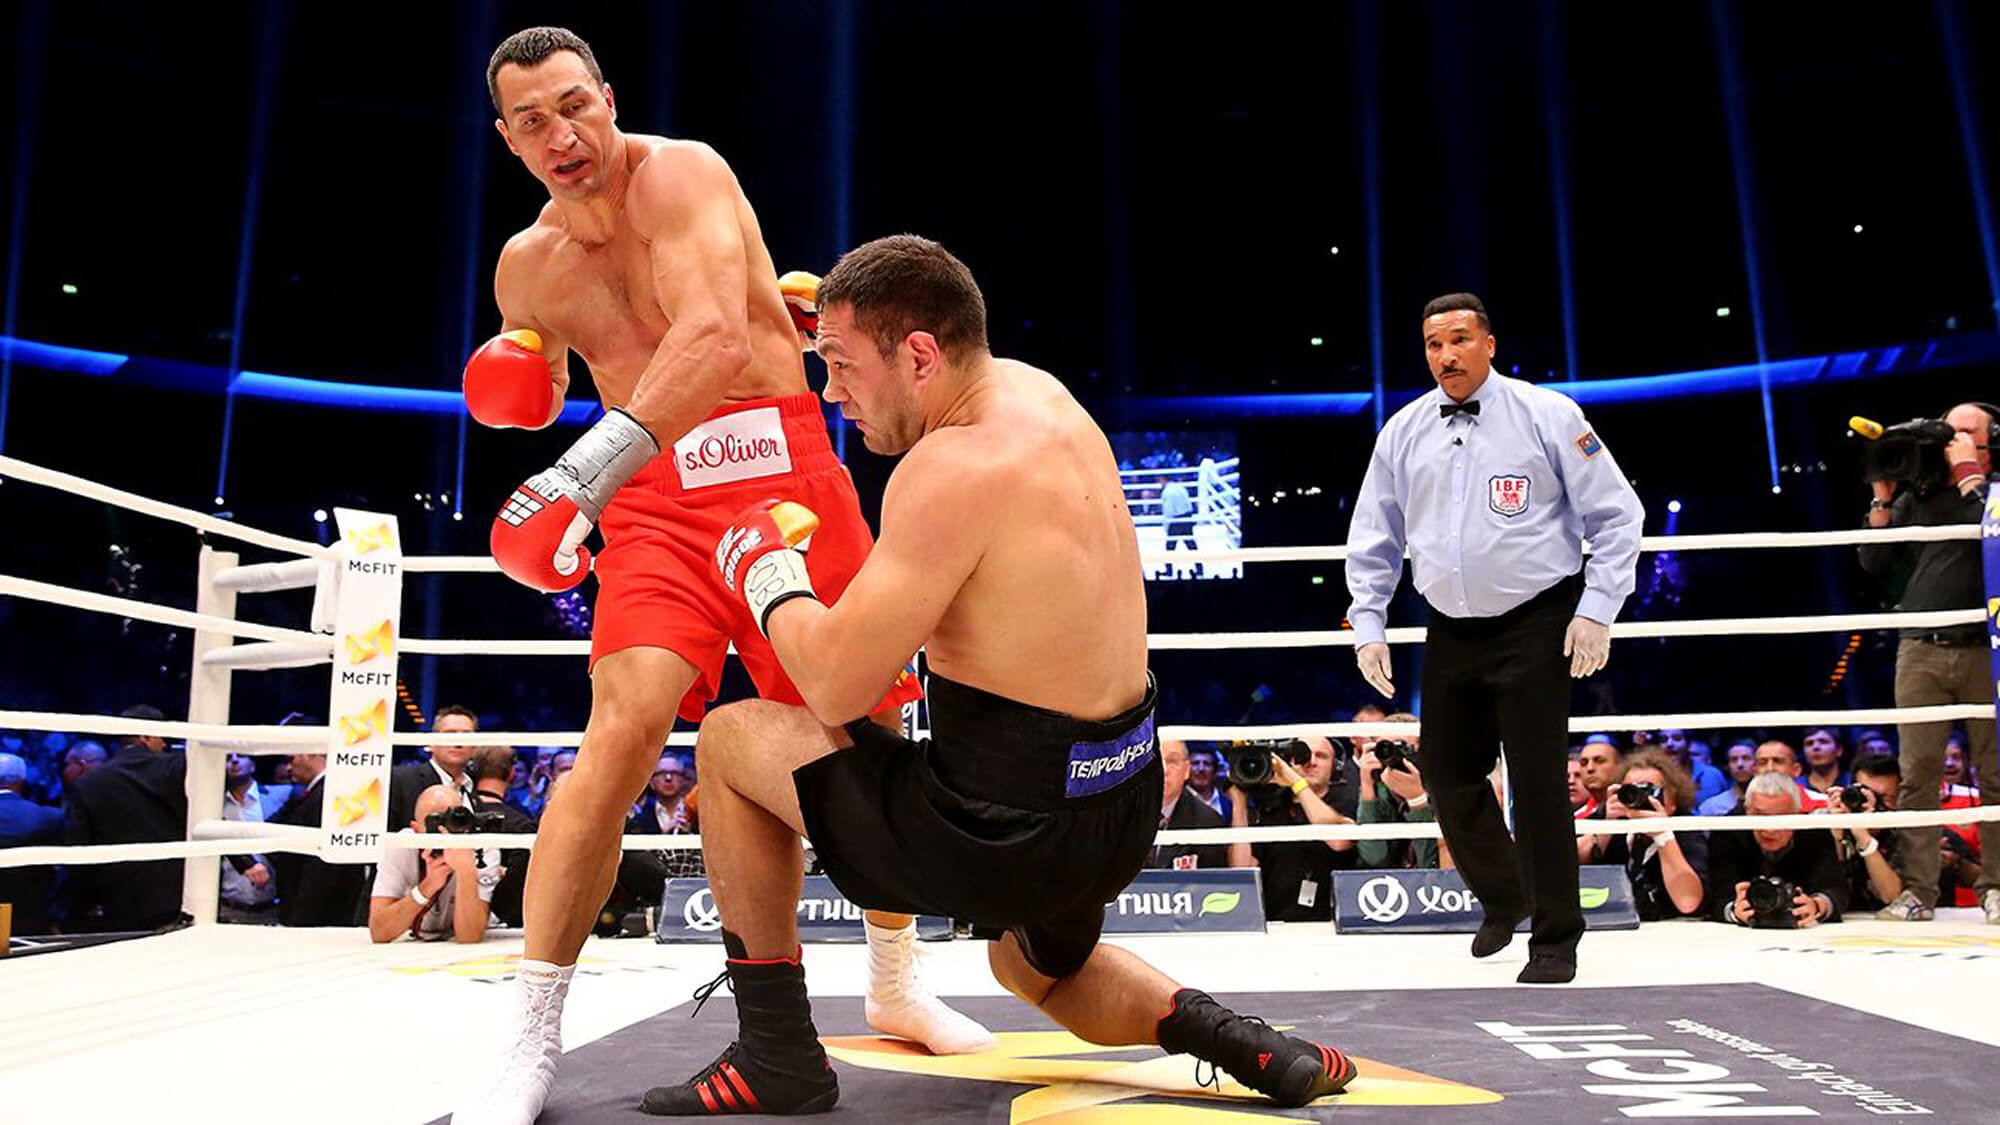 It’s the Right Time to Appreciate Wladimir Klitschko’s All-Time Great Career